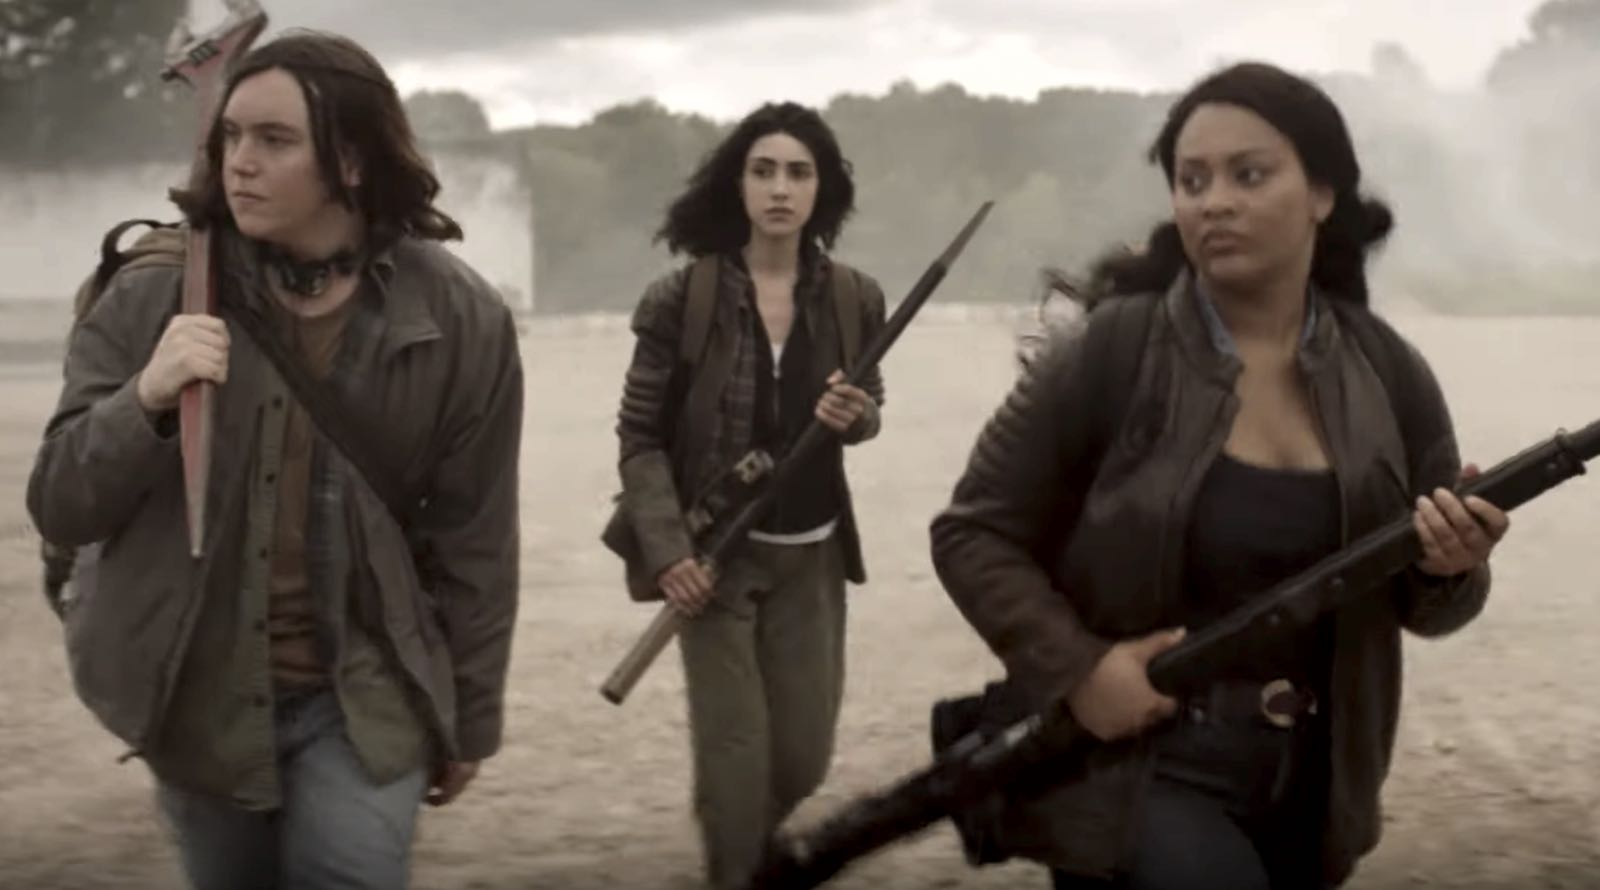 Trailer Drops for New 'Walking Dead' Series Coming to AMC in 2020